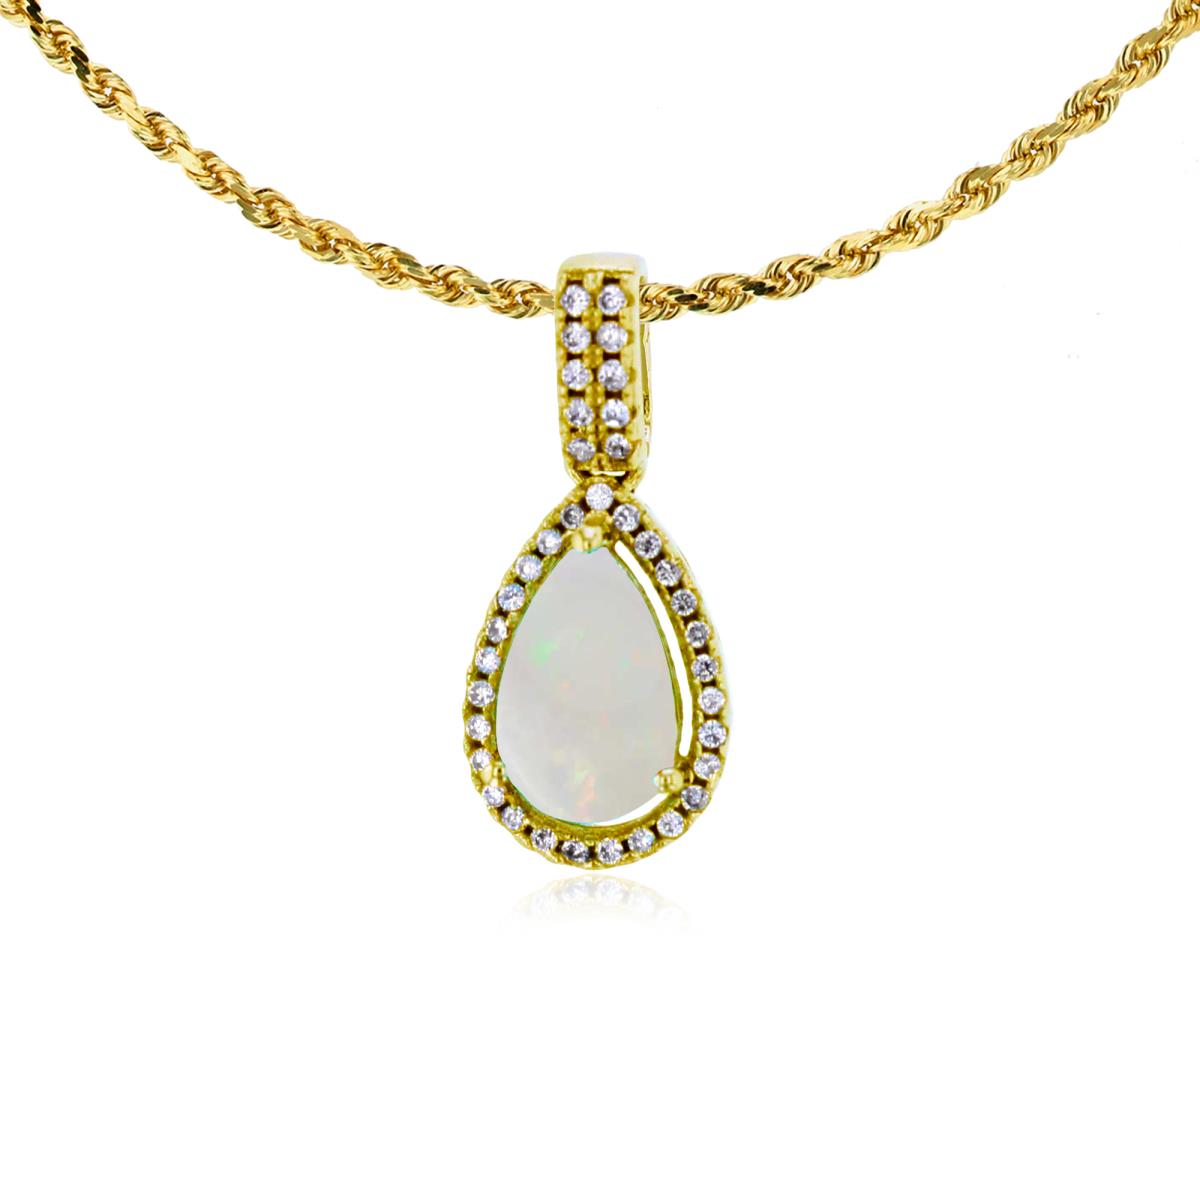 10K Yellow Gold 8x5mm Pear Cut Opal & 0.11 CTTW Diamond Halo 18" Rope Chain Necklace